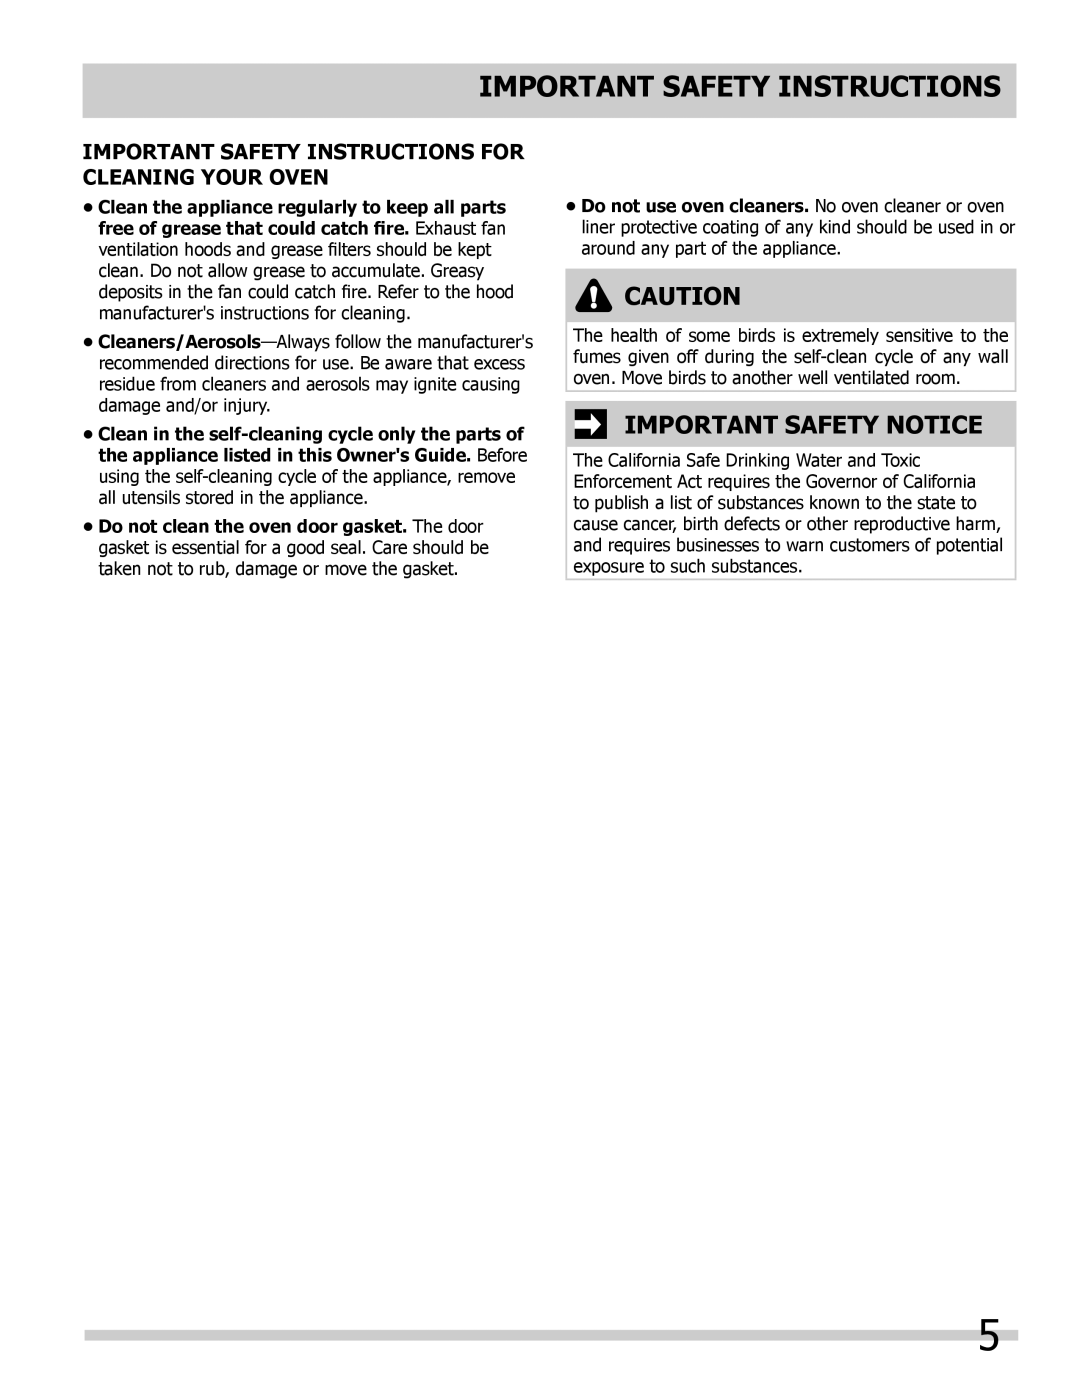 Frigidaire FFEW3025LB, FFEW3025LW, FFEW3025LS Important Safety Notice, Important Safety Instructions For Cleaning Your Oven 